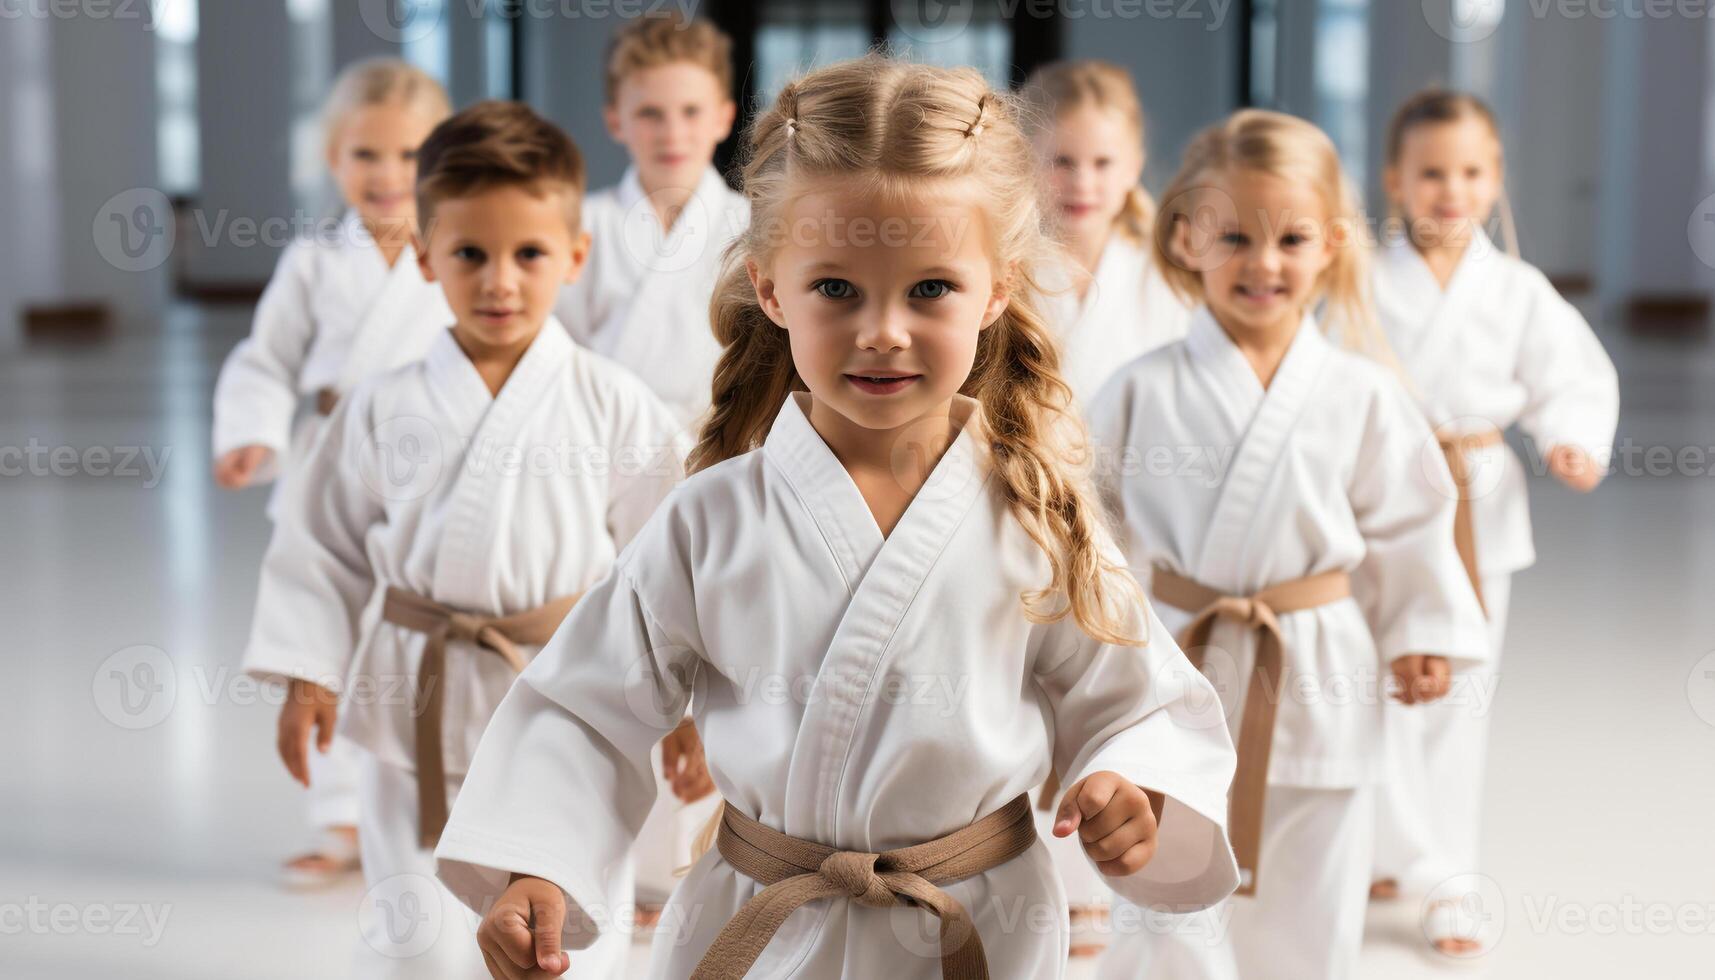 AI generated Group of children practicing taekwondo in sports uniforms, smiling happily generated by AI photo